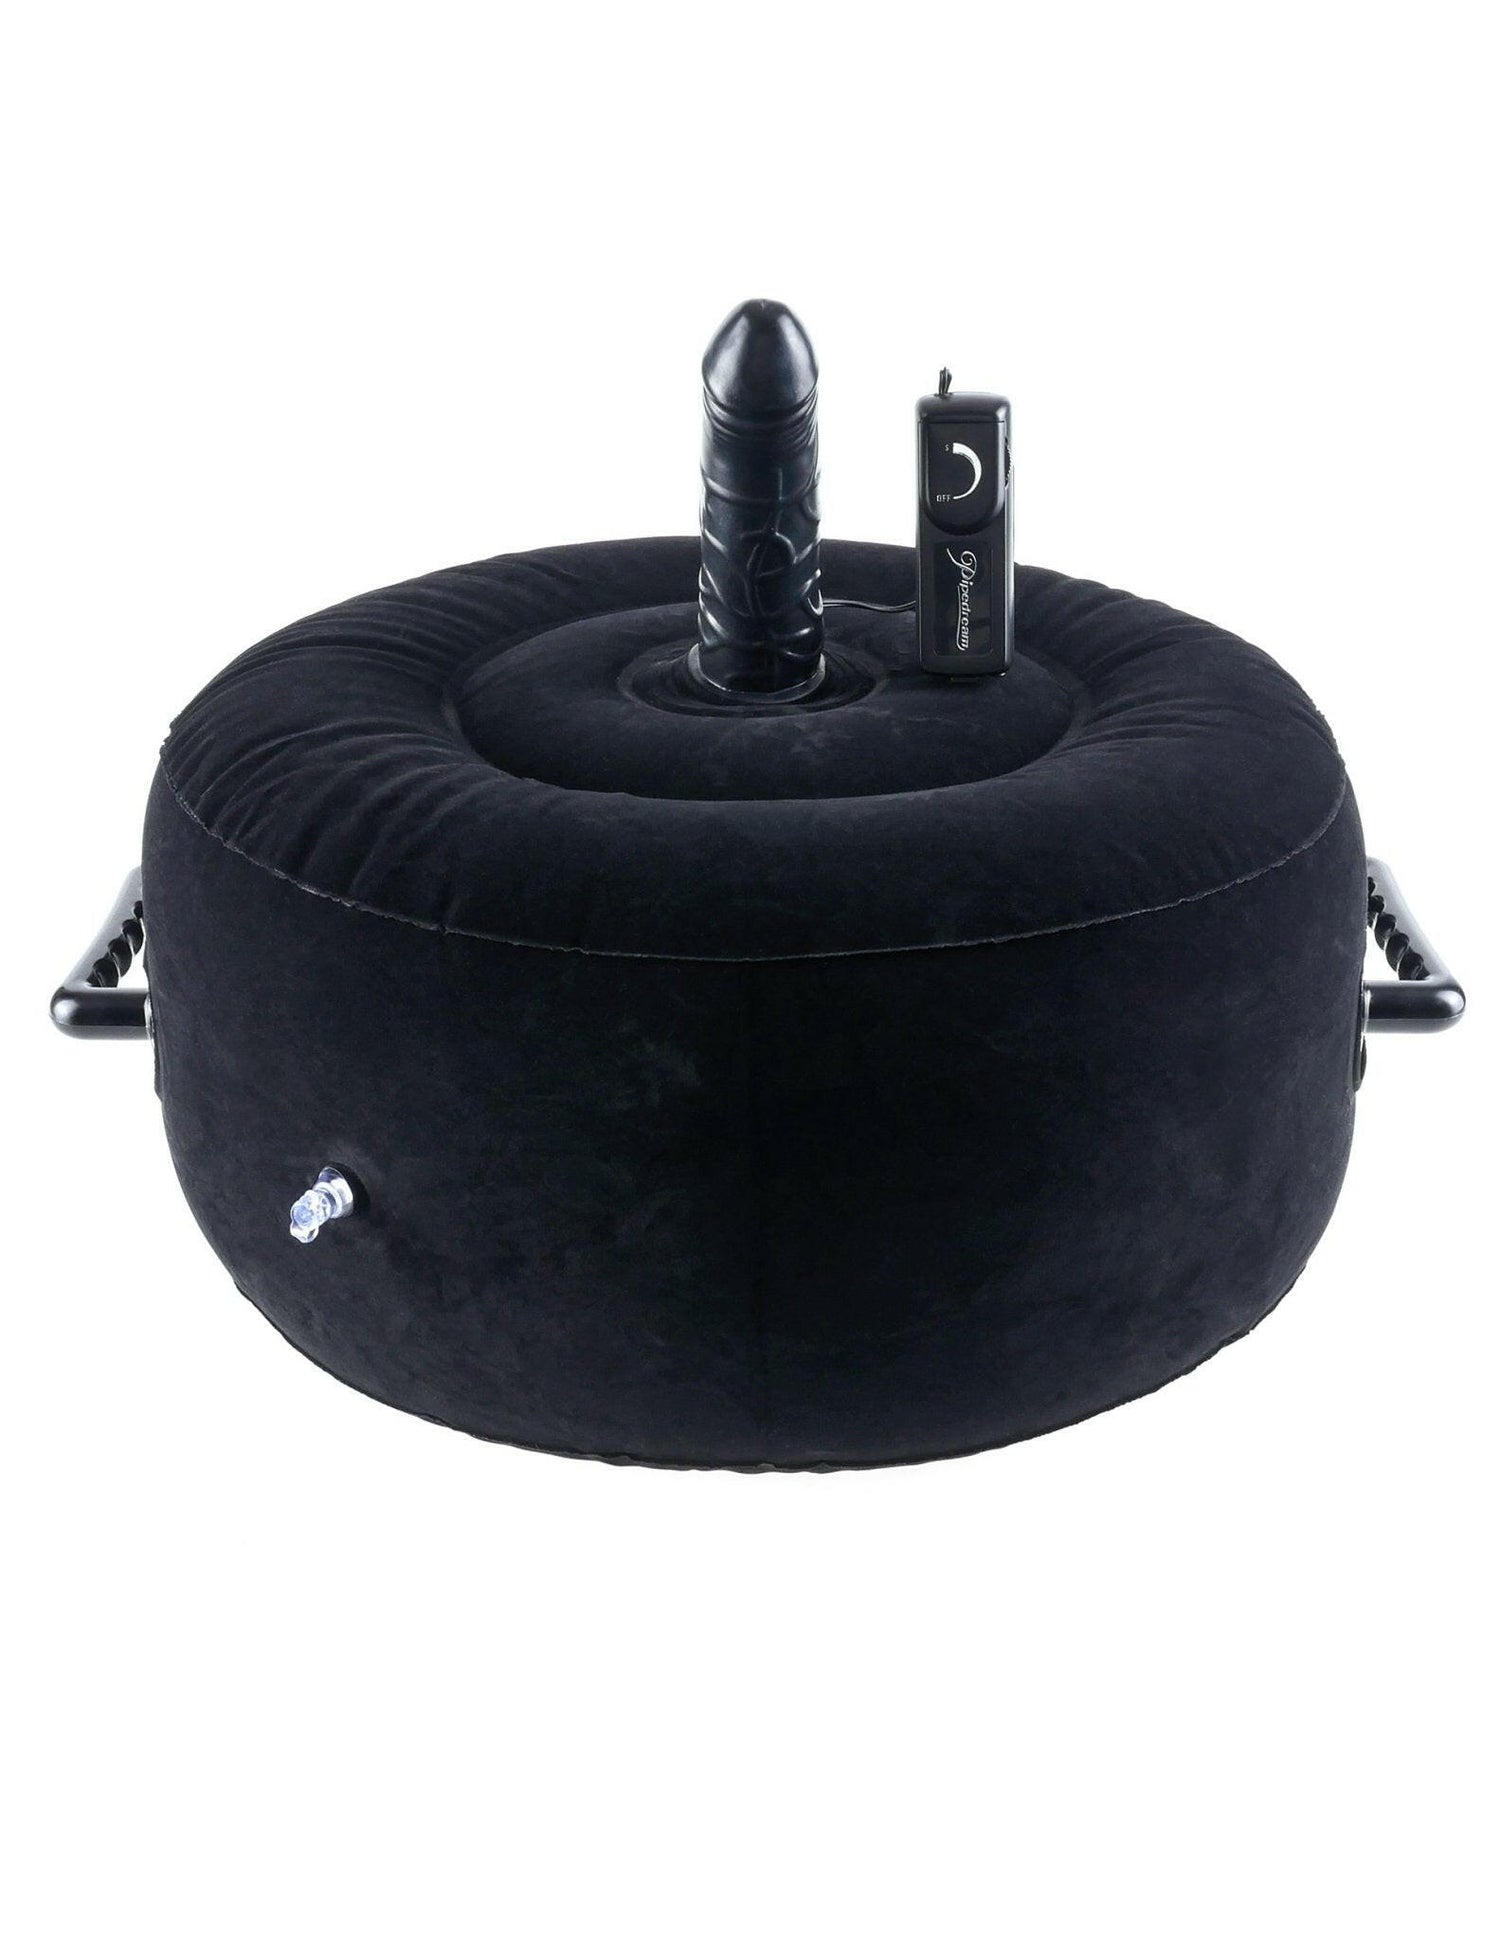 Fetish Fantasy Inflatable Hot Seat With 5.5 Inch Dong - TemptationsPipedreamTemptationsPD2181-00